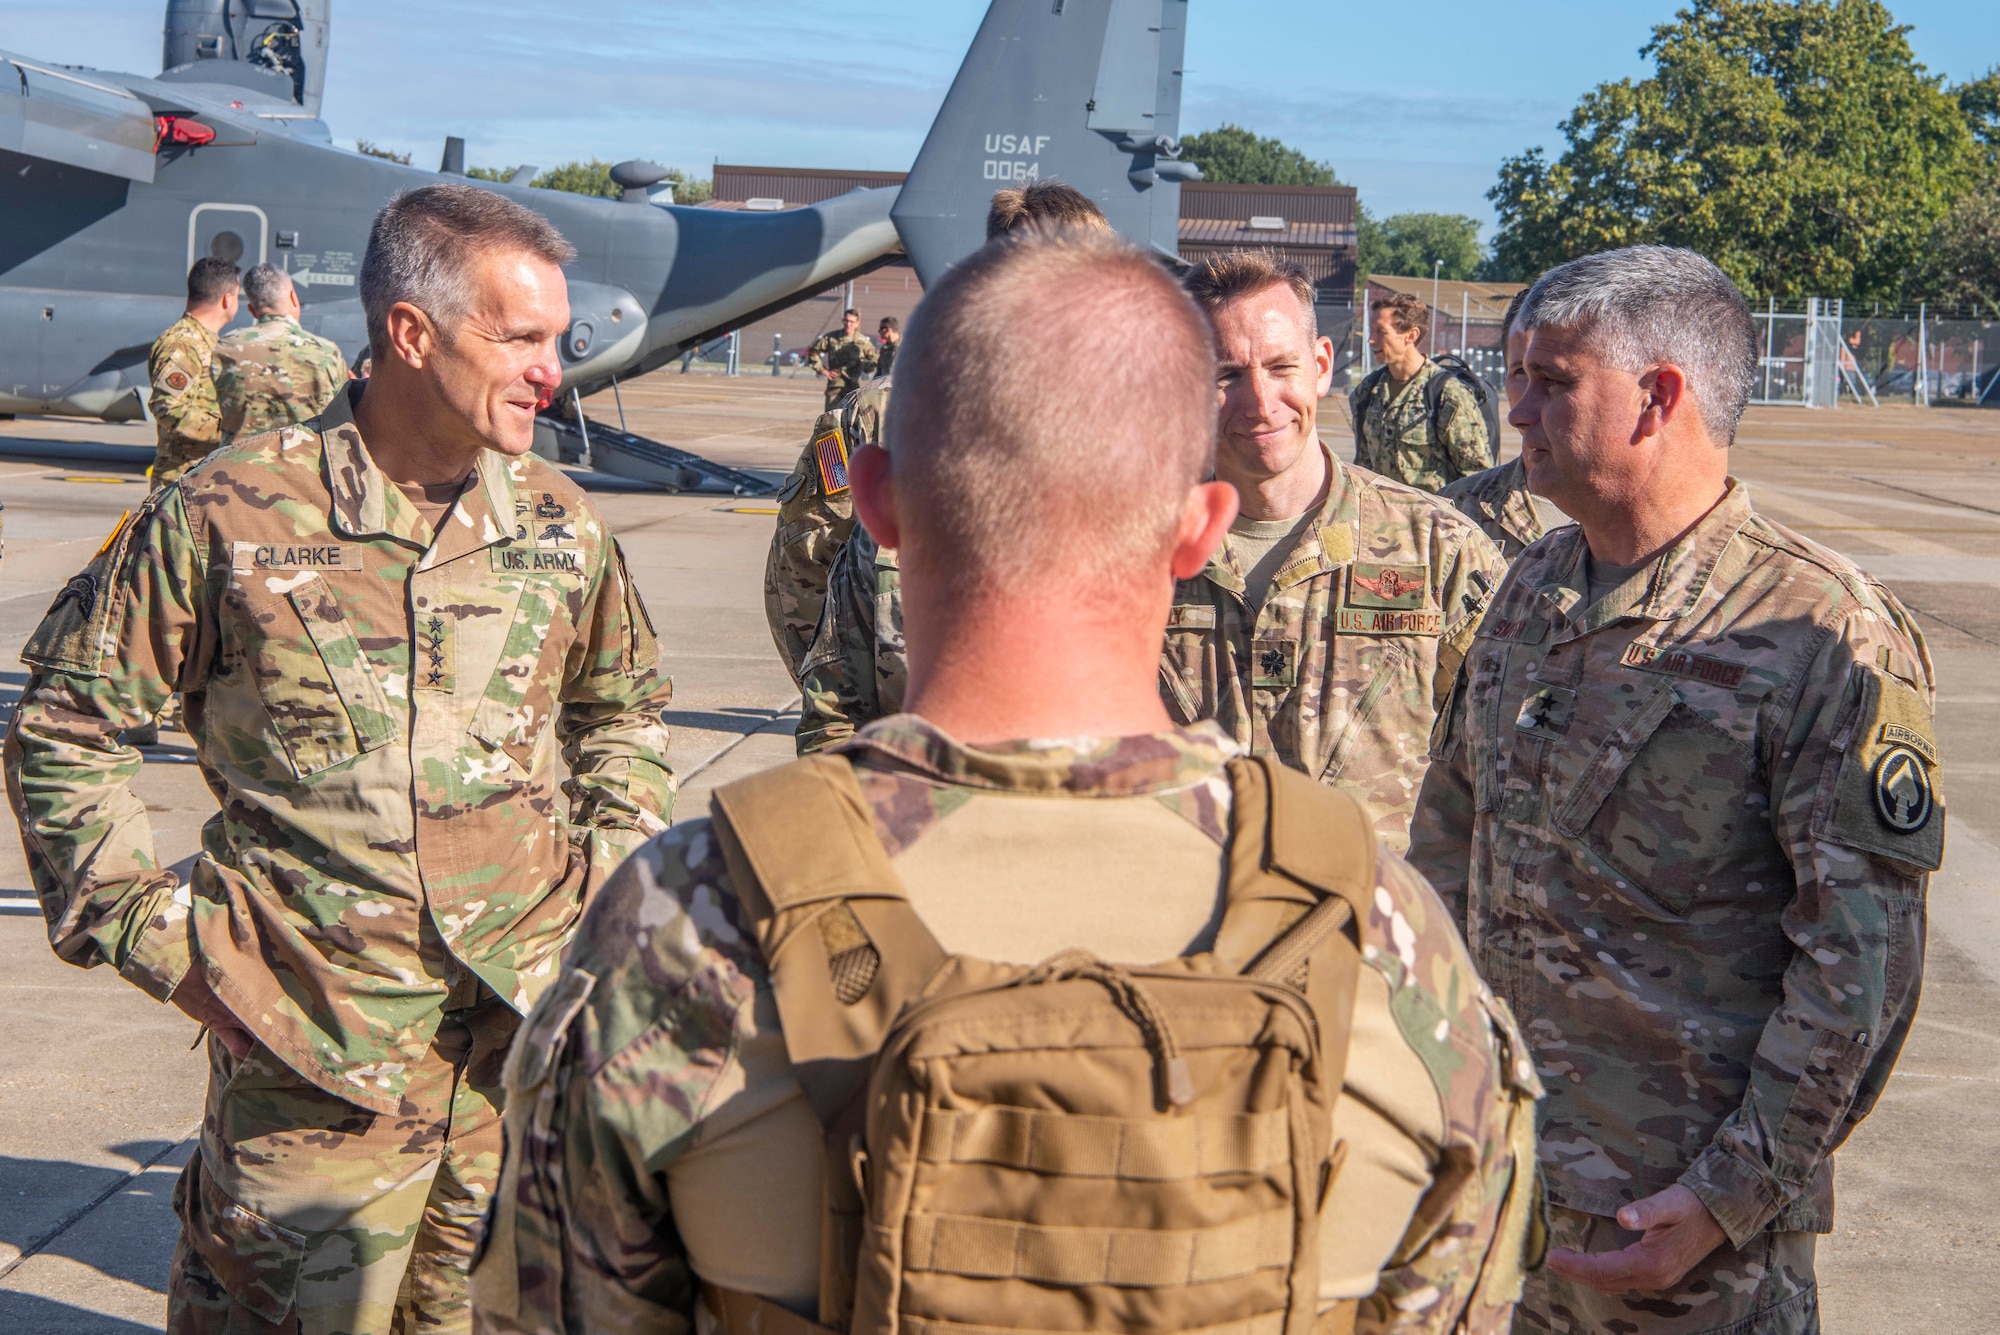 U.S. Army Gen. Richard D. Clarke, United States Special Operations Command commander, speaks with U.S. Air Force Maj. Gen. Kirk W. Smith, Special Operations Command Europe commander, on a tour of the 352nd Special Operations Wing at RAF Mildenhall, England, Sept. 12, 2019. The mission of the 352nd SOW, part of Air Force Special Operations Command, is to provide combat ready, responsive, specialized airpower and combat support to execute the full spectrum of SOF missions. (U.S. Air Force photo by Airman 1st Class Joseph Barron)